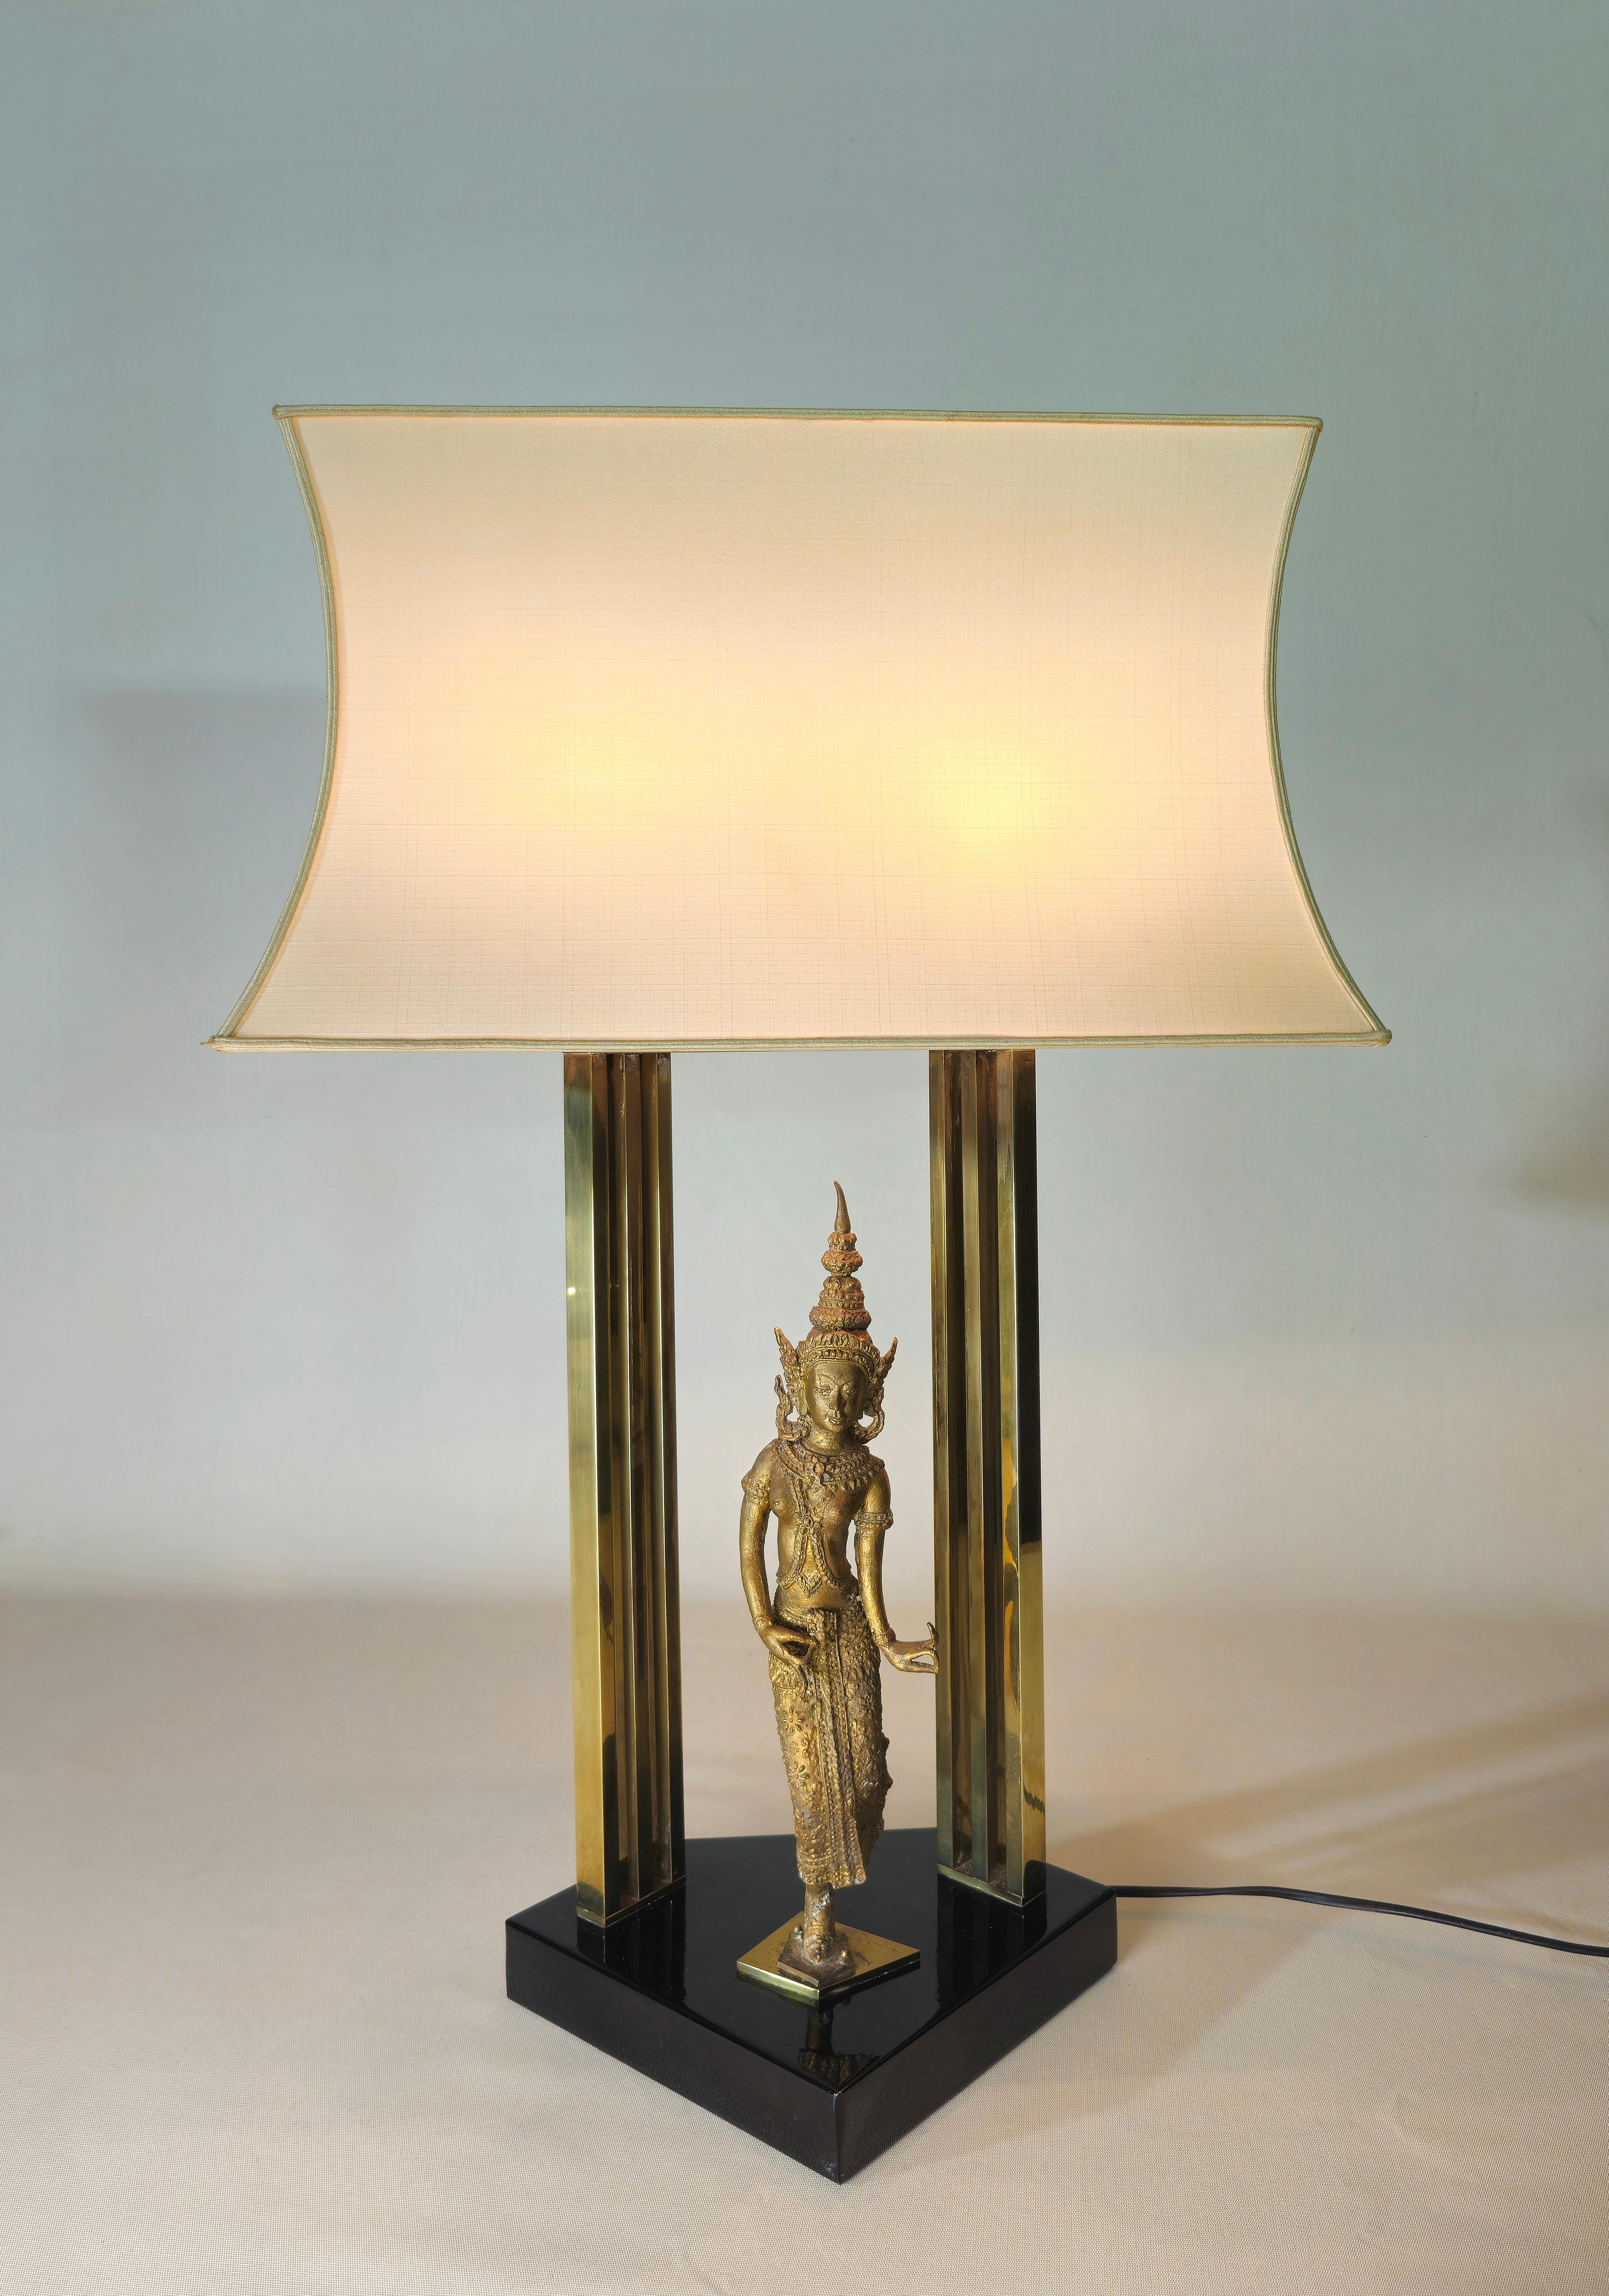 Table lamp of considerable dimensions produced in Italy in the 60/70s. Brass structure, black enamelled base and fabric diffuser. In the center there is a sculpture depicting a dancer from the Thai temple in gilded and chiseled bronze. Unfortunately